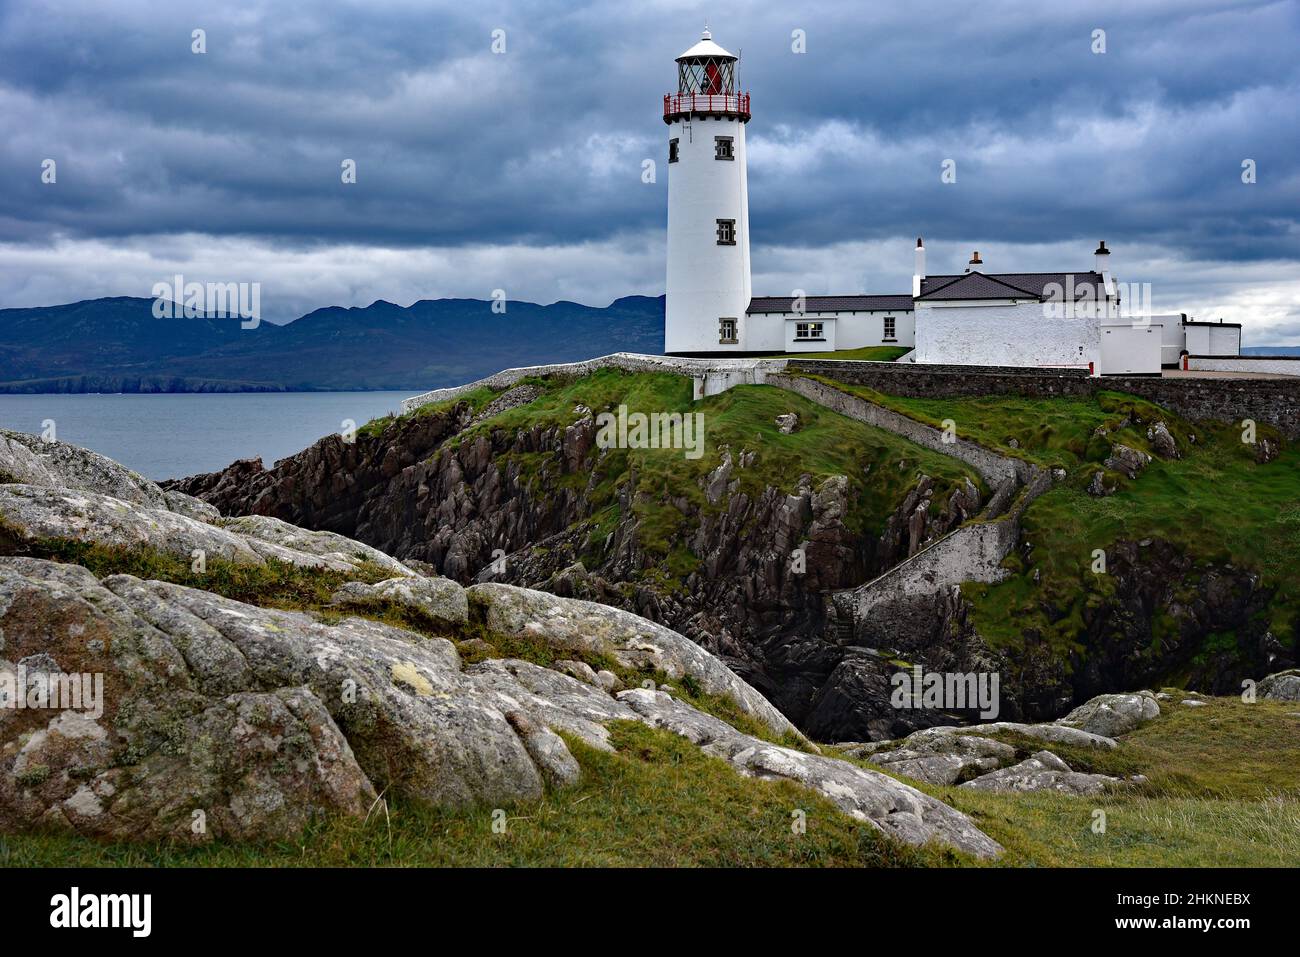 Fanad Head Lighthouse, Donegal, Ireland, voted one of the most beautiful lighthouses in the world. Stock Photo